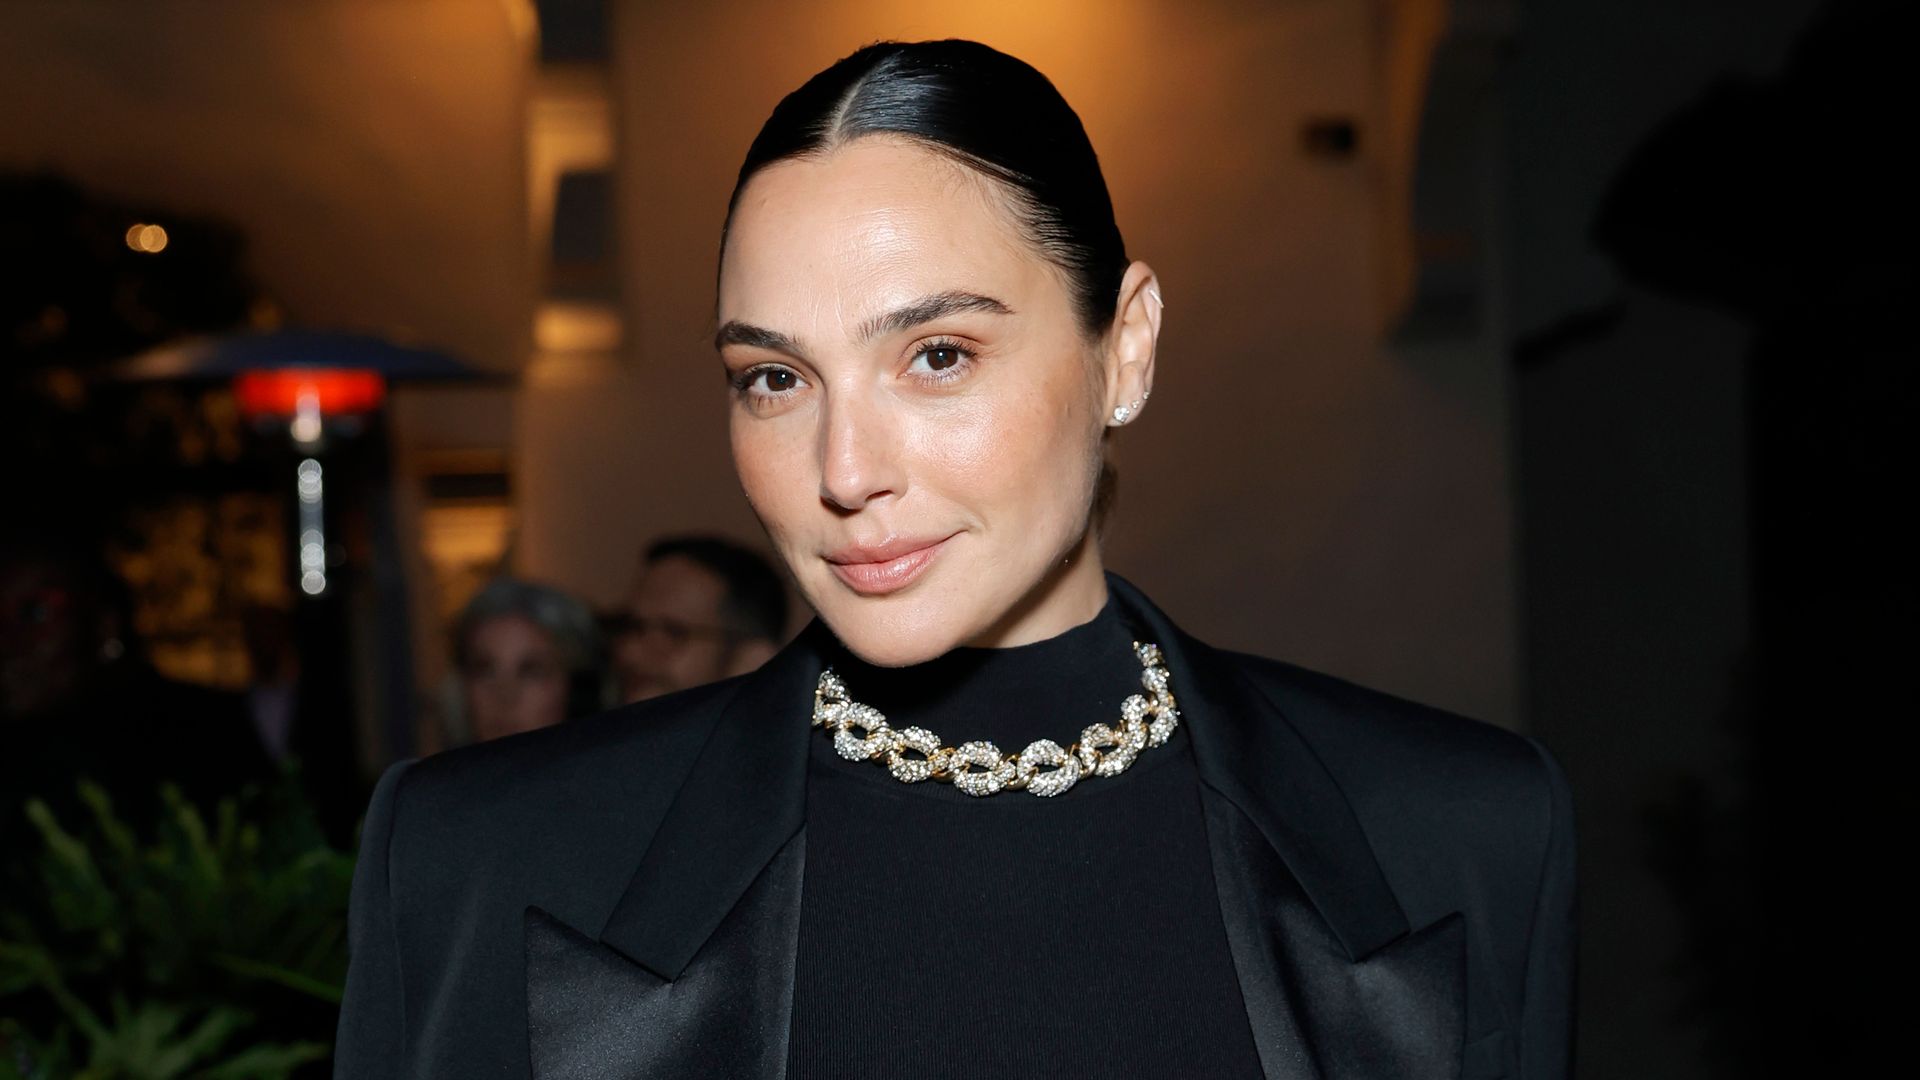 Gal Gadot pours curves into figure-hugging dress seven weeks after birth of fourth child